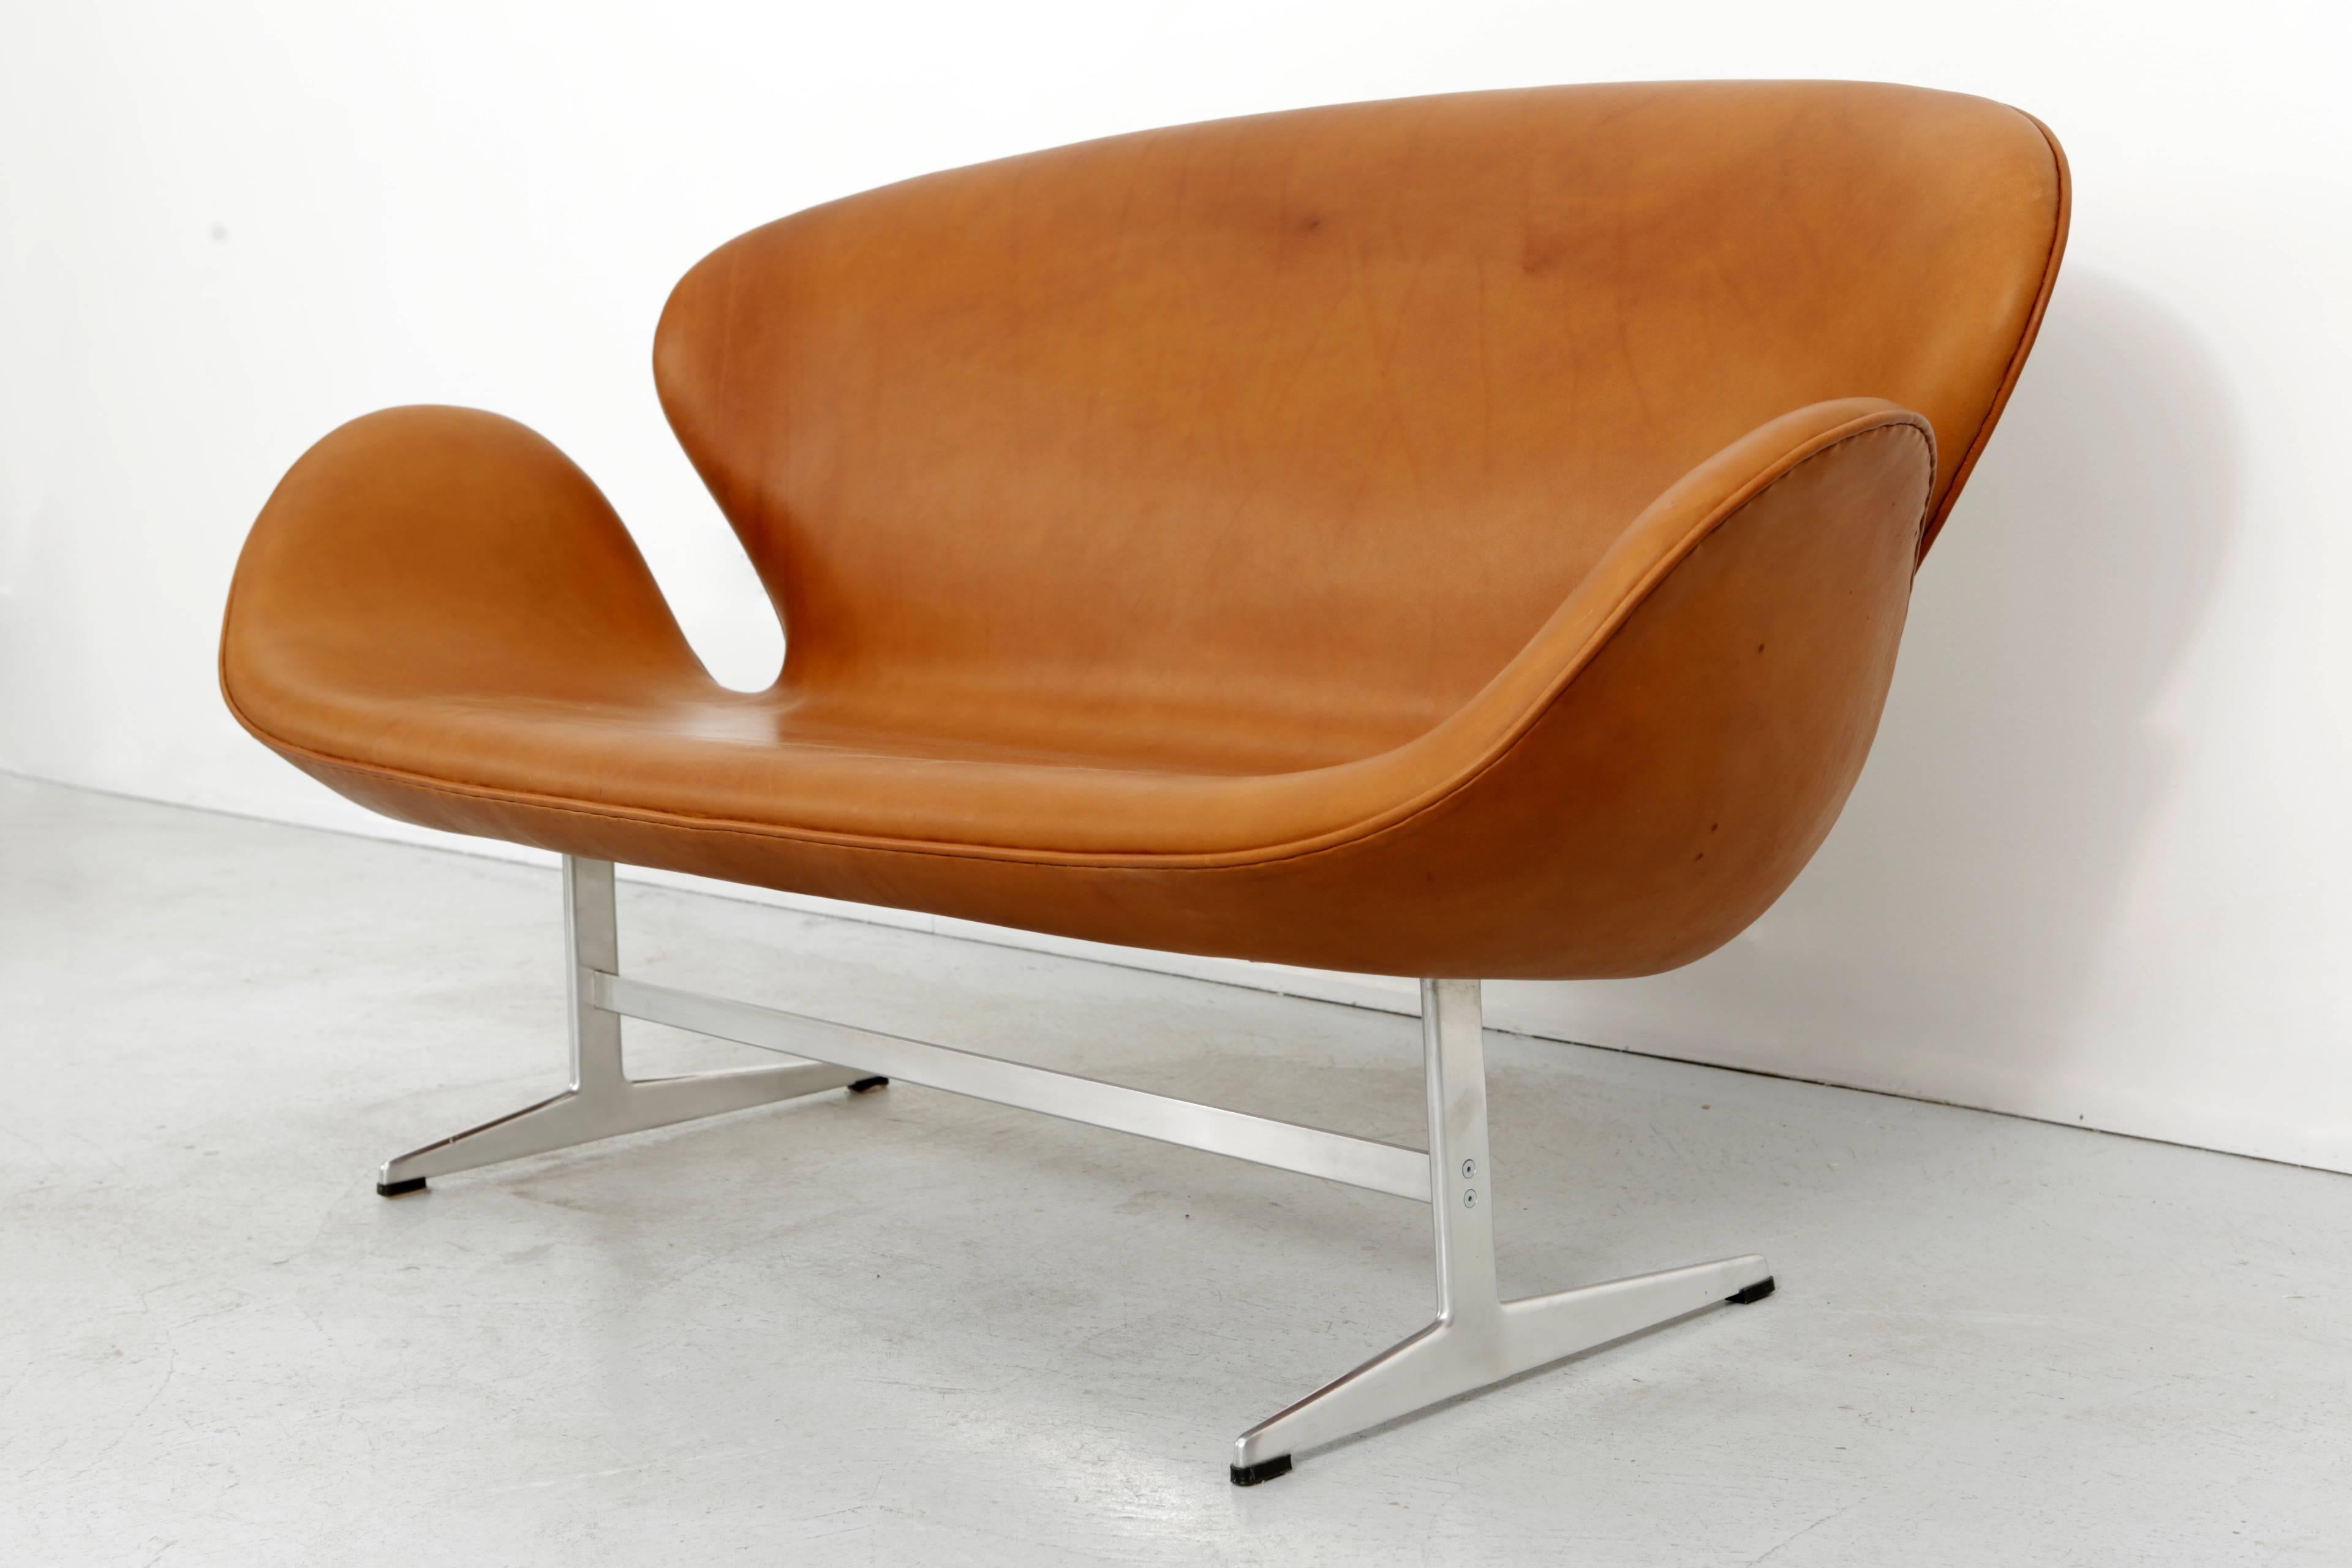 Arne Jacobsen Swan sofa (model 3320) for The Republic of Fritz Hansen reupholstered in cognac leather.  This iconic piece was originally designed for the SAS Royal Hotel in Copenhagen in 1958.   